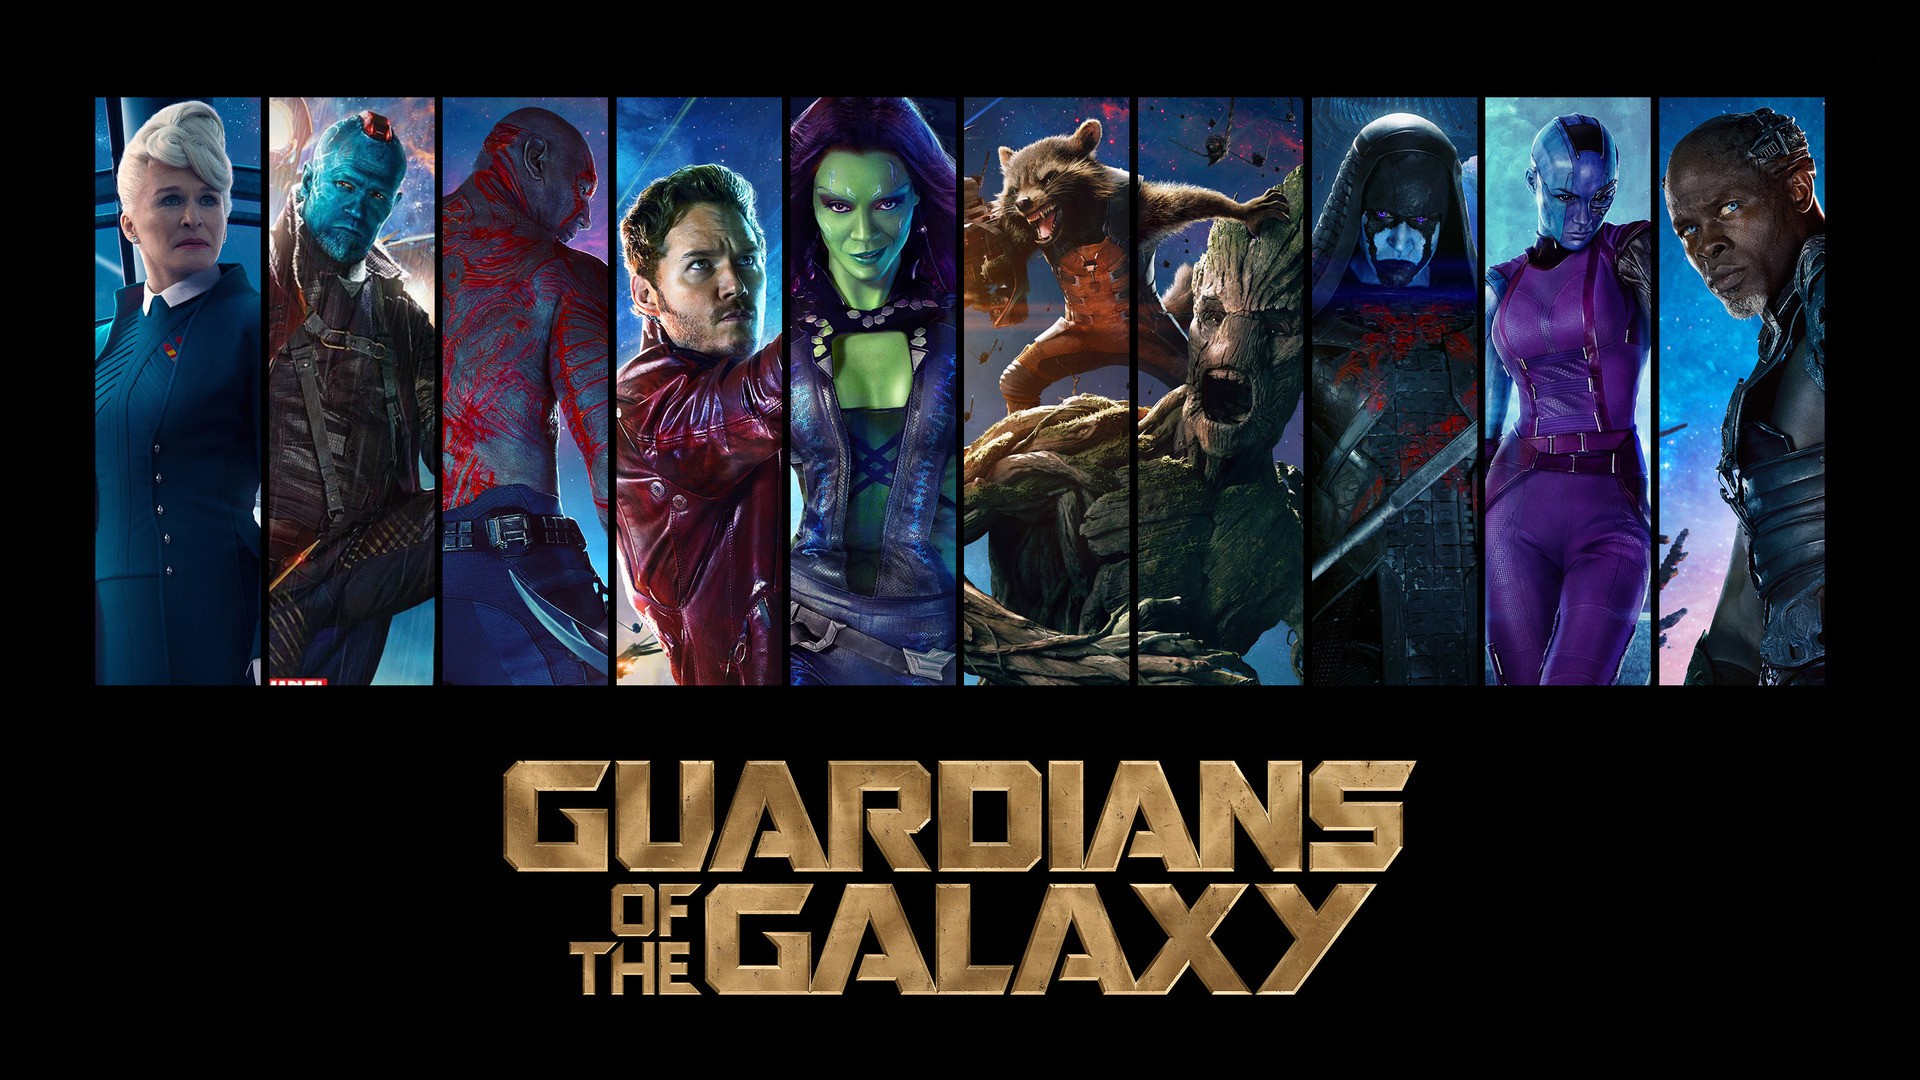 Guardians Of The Galaxy, Star Lord, Gamora, Rocket Raccoon, Groot, Drax The Destroyer, Movies Wallpaper